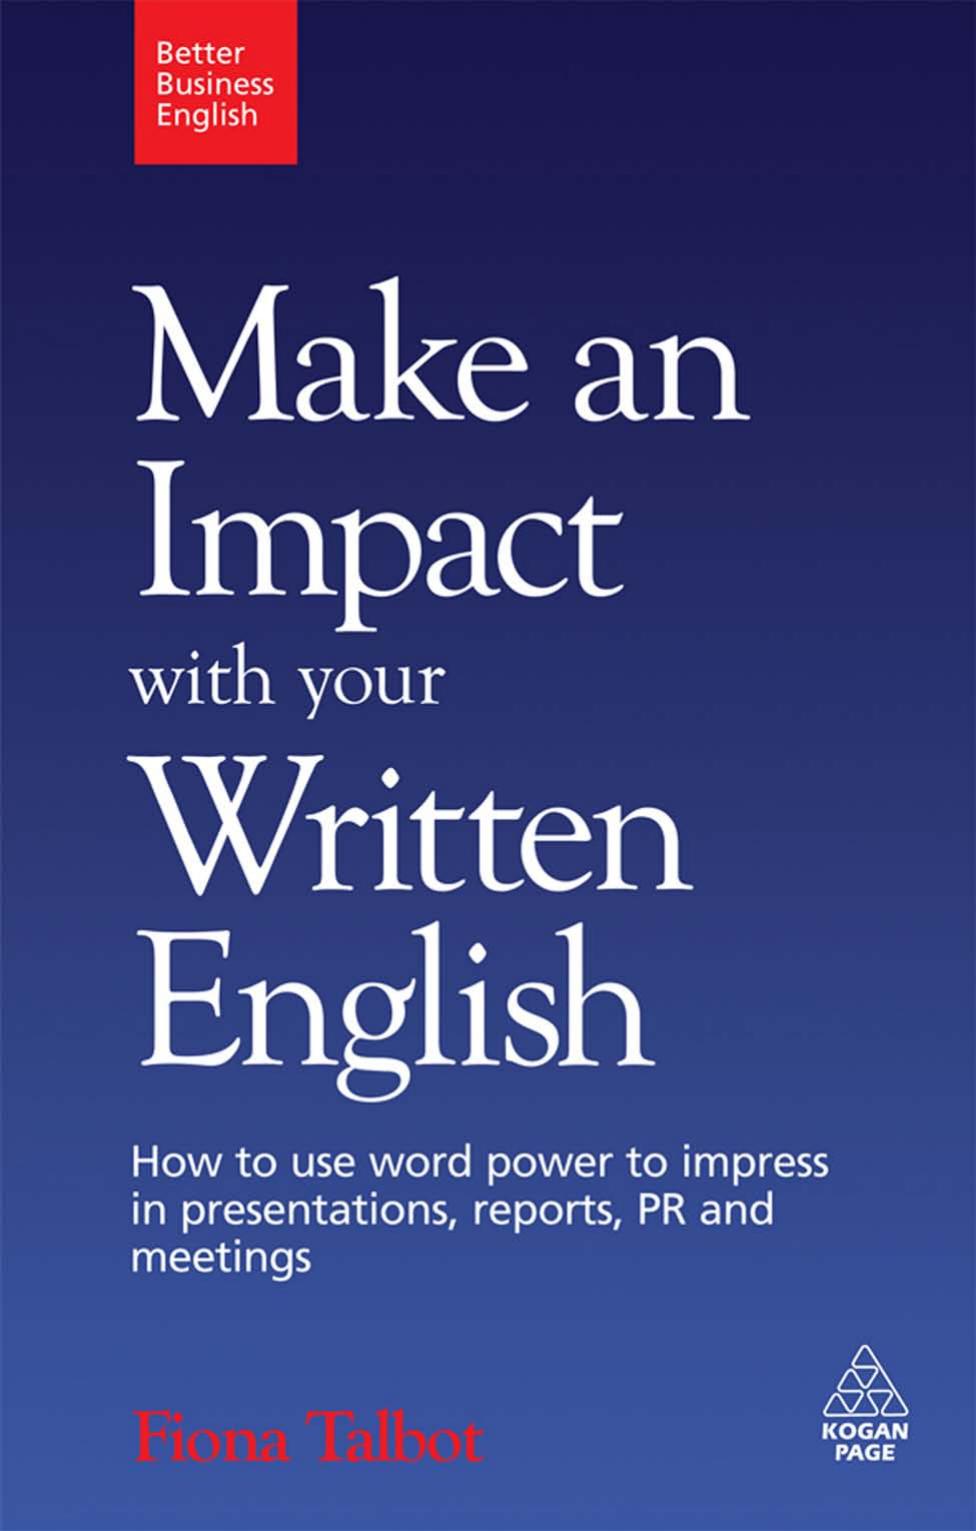 Make an Impact with Your Written English. 2009